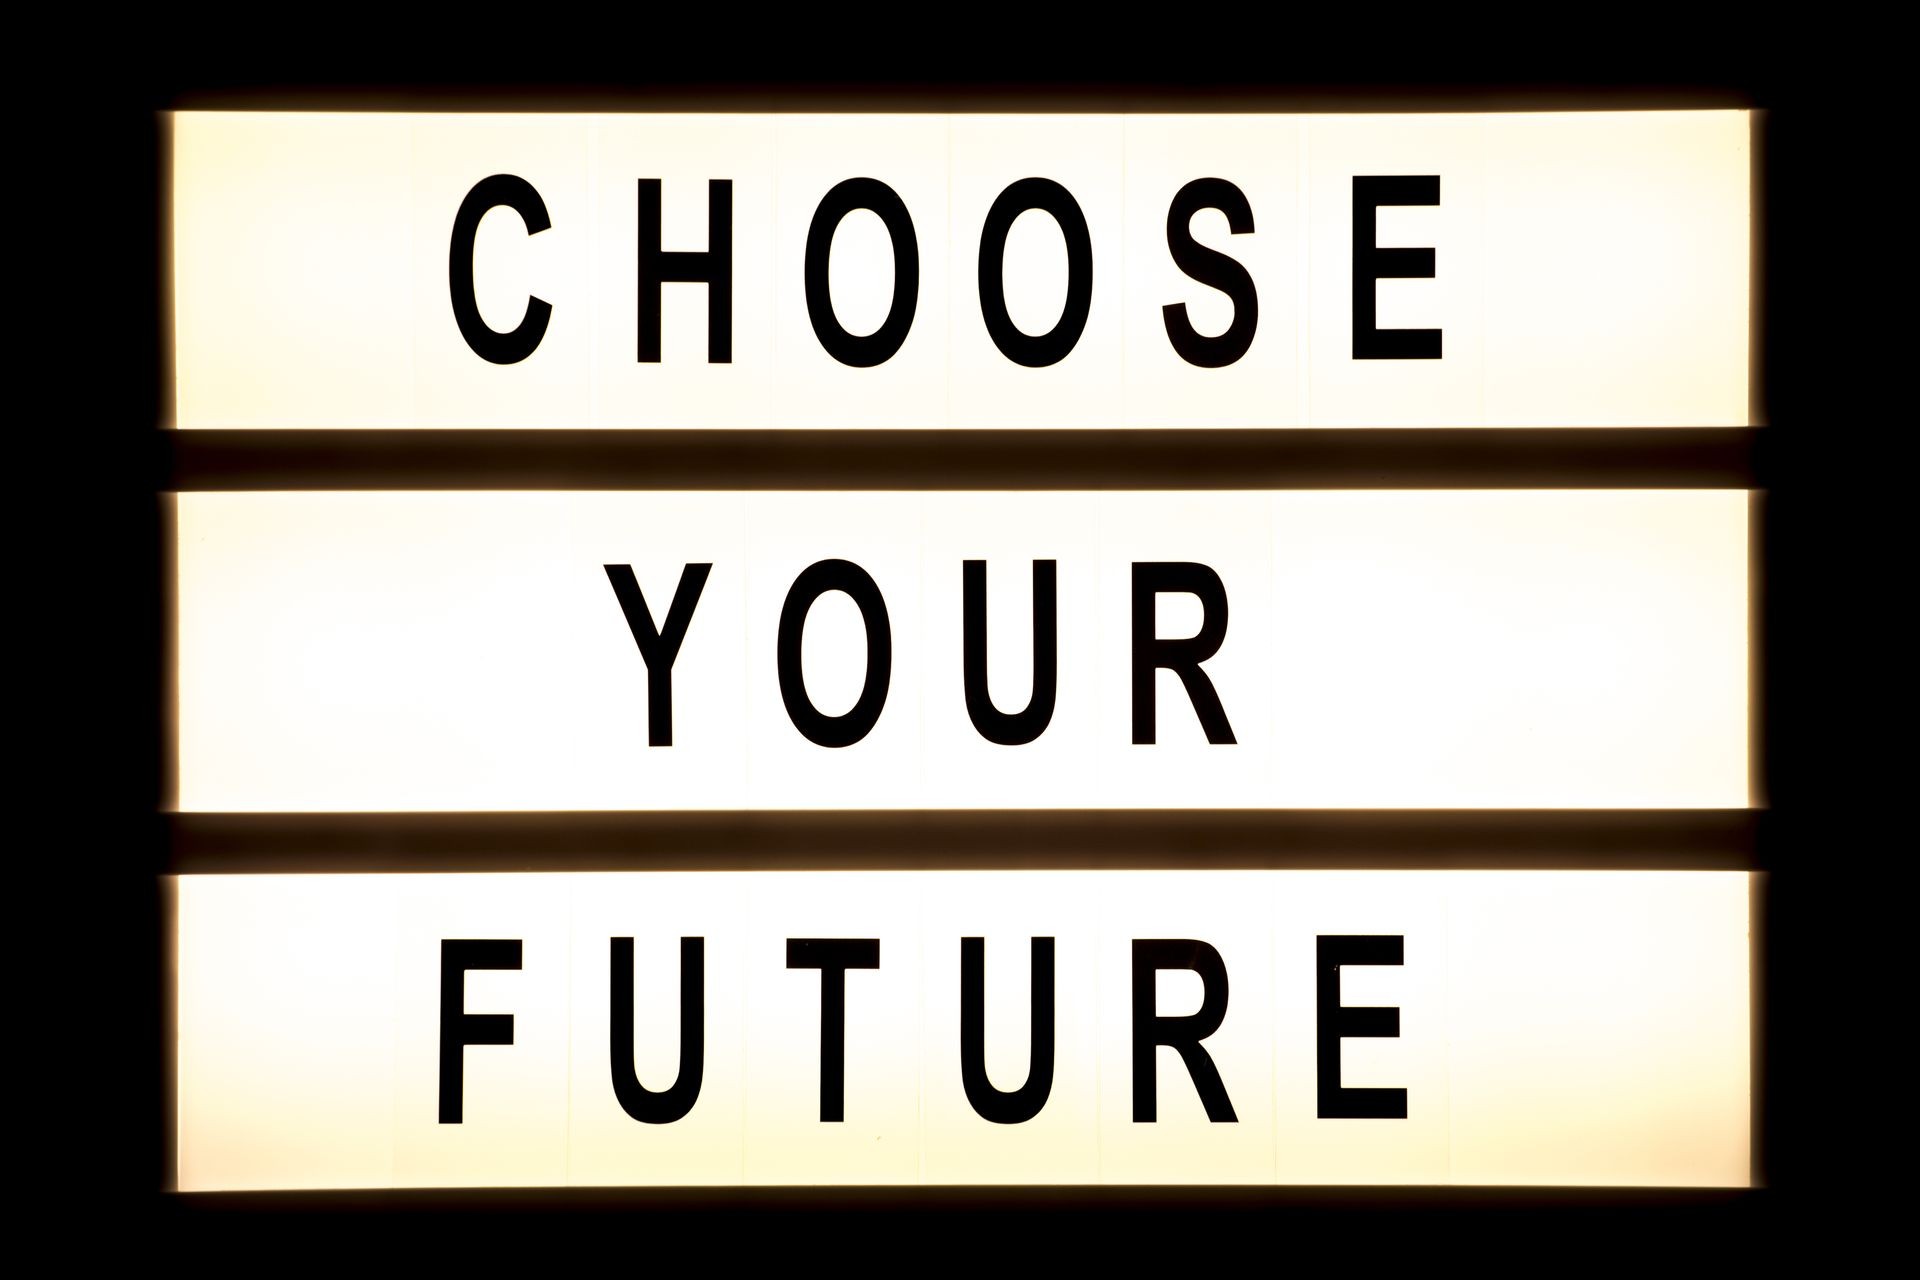 Choose your future hanging light box sign board.